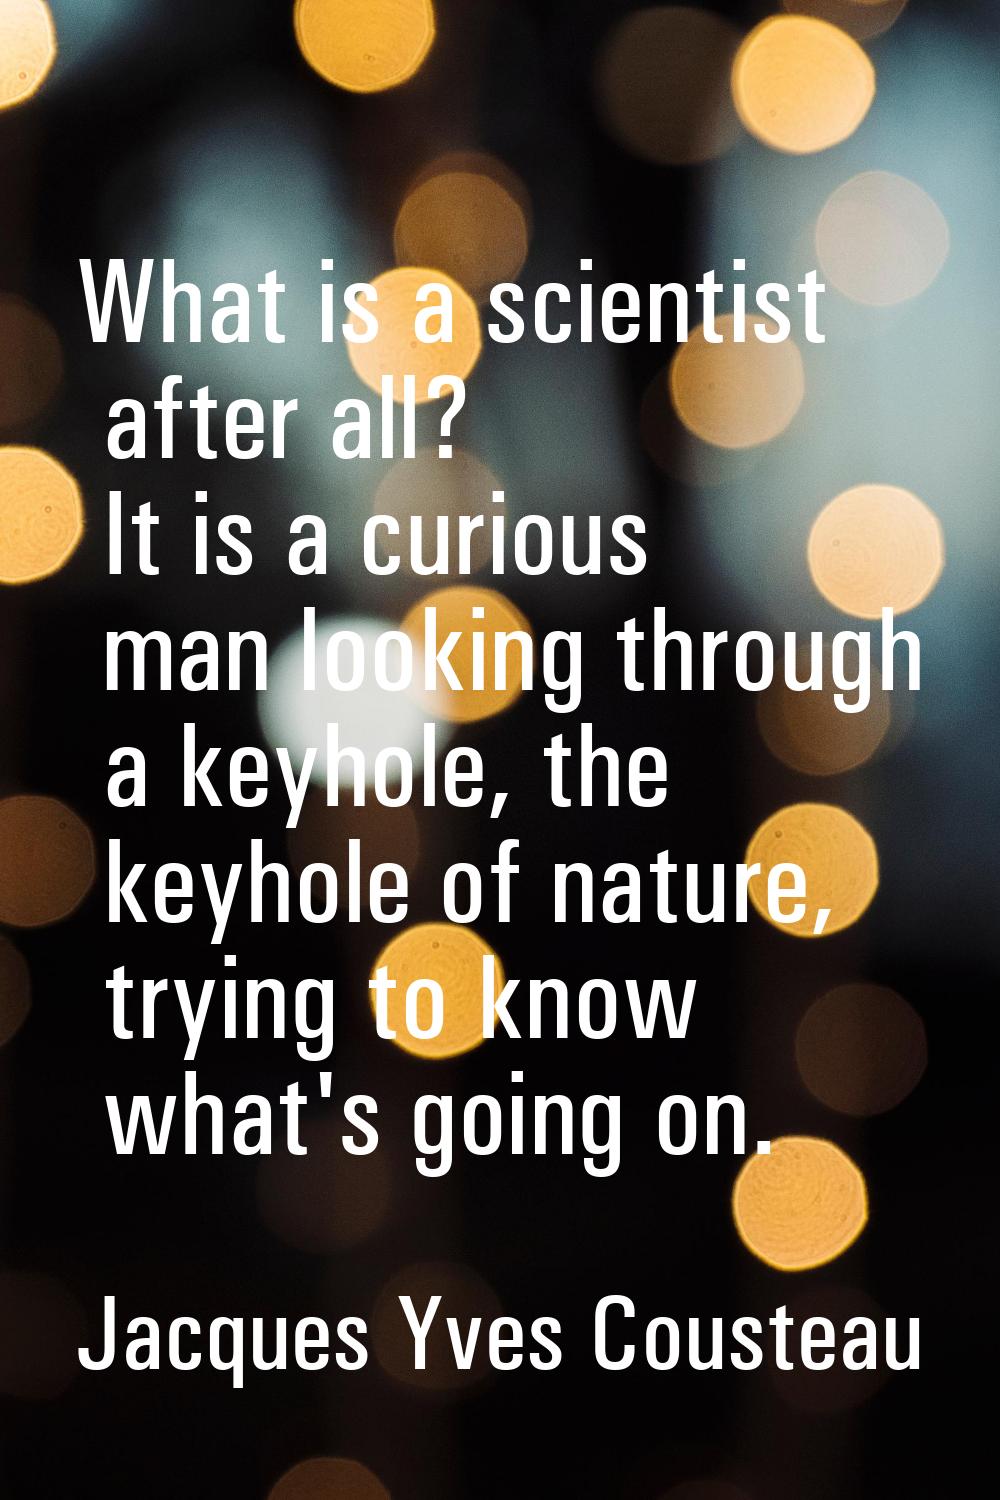 What is a scientist after all? It is a curious man looking through a keyhole, the keyhole of nature